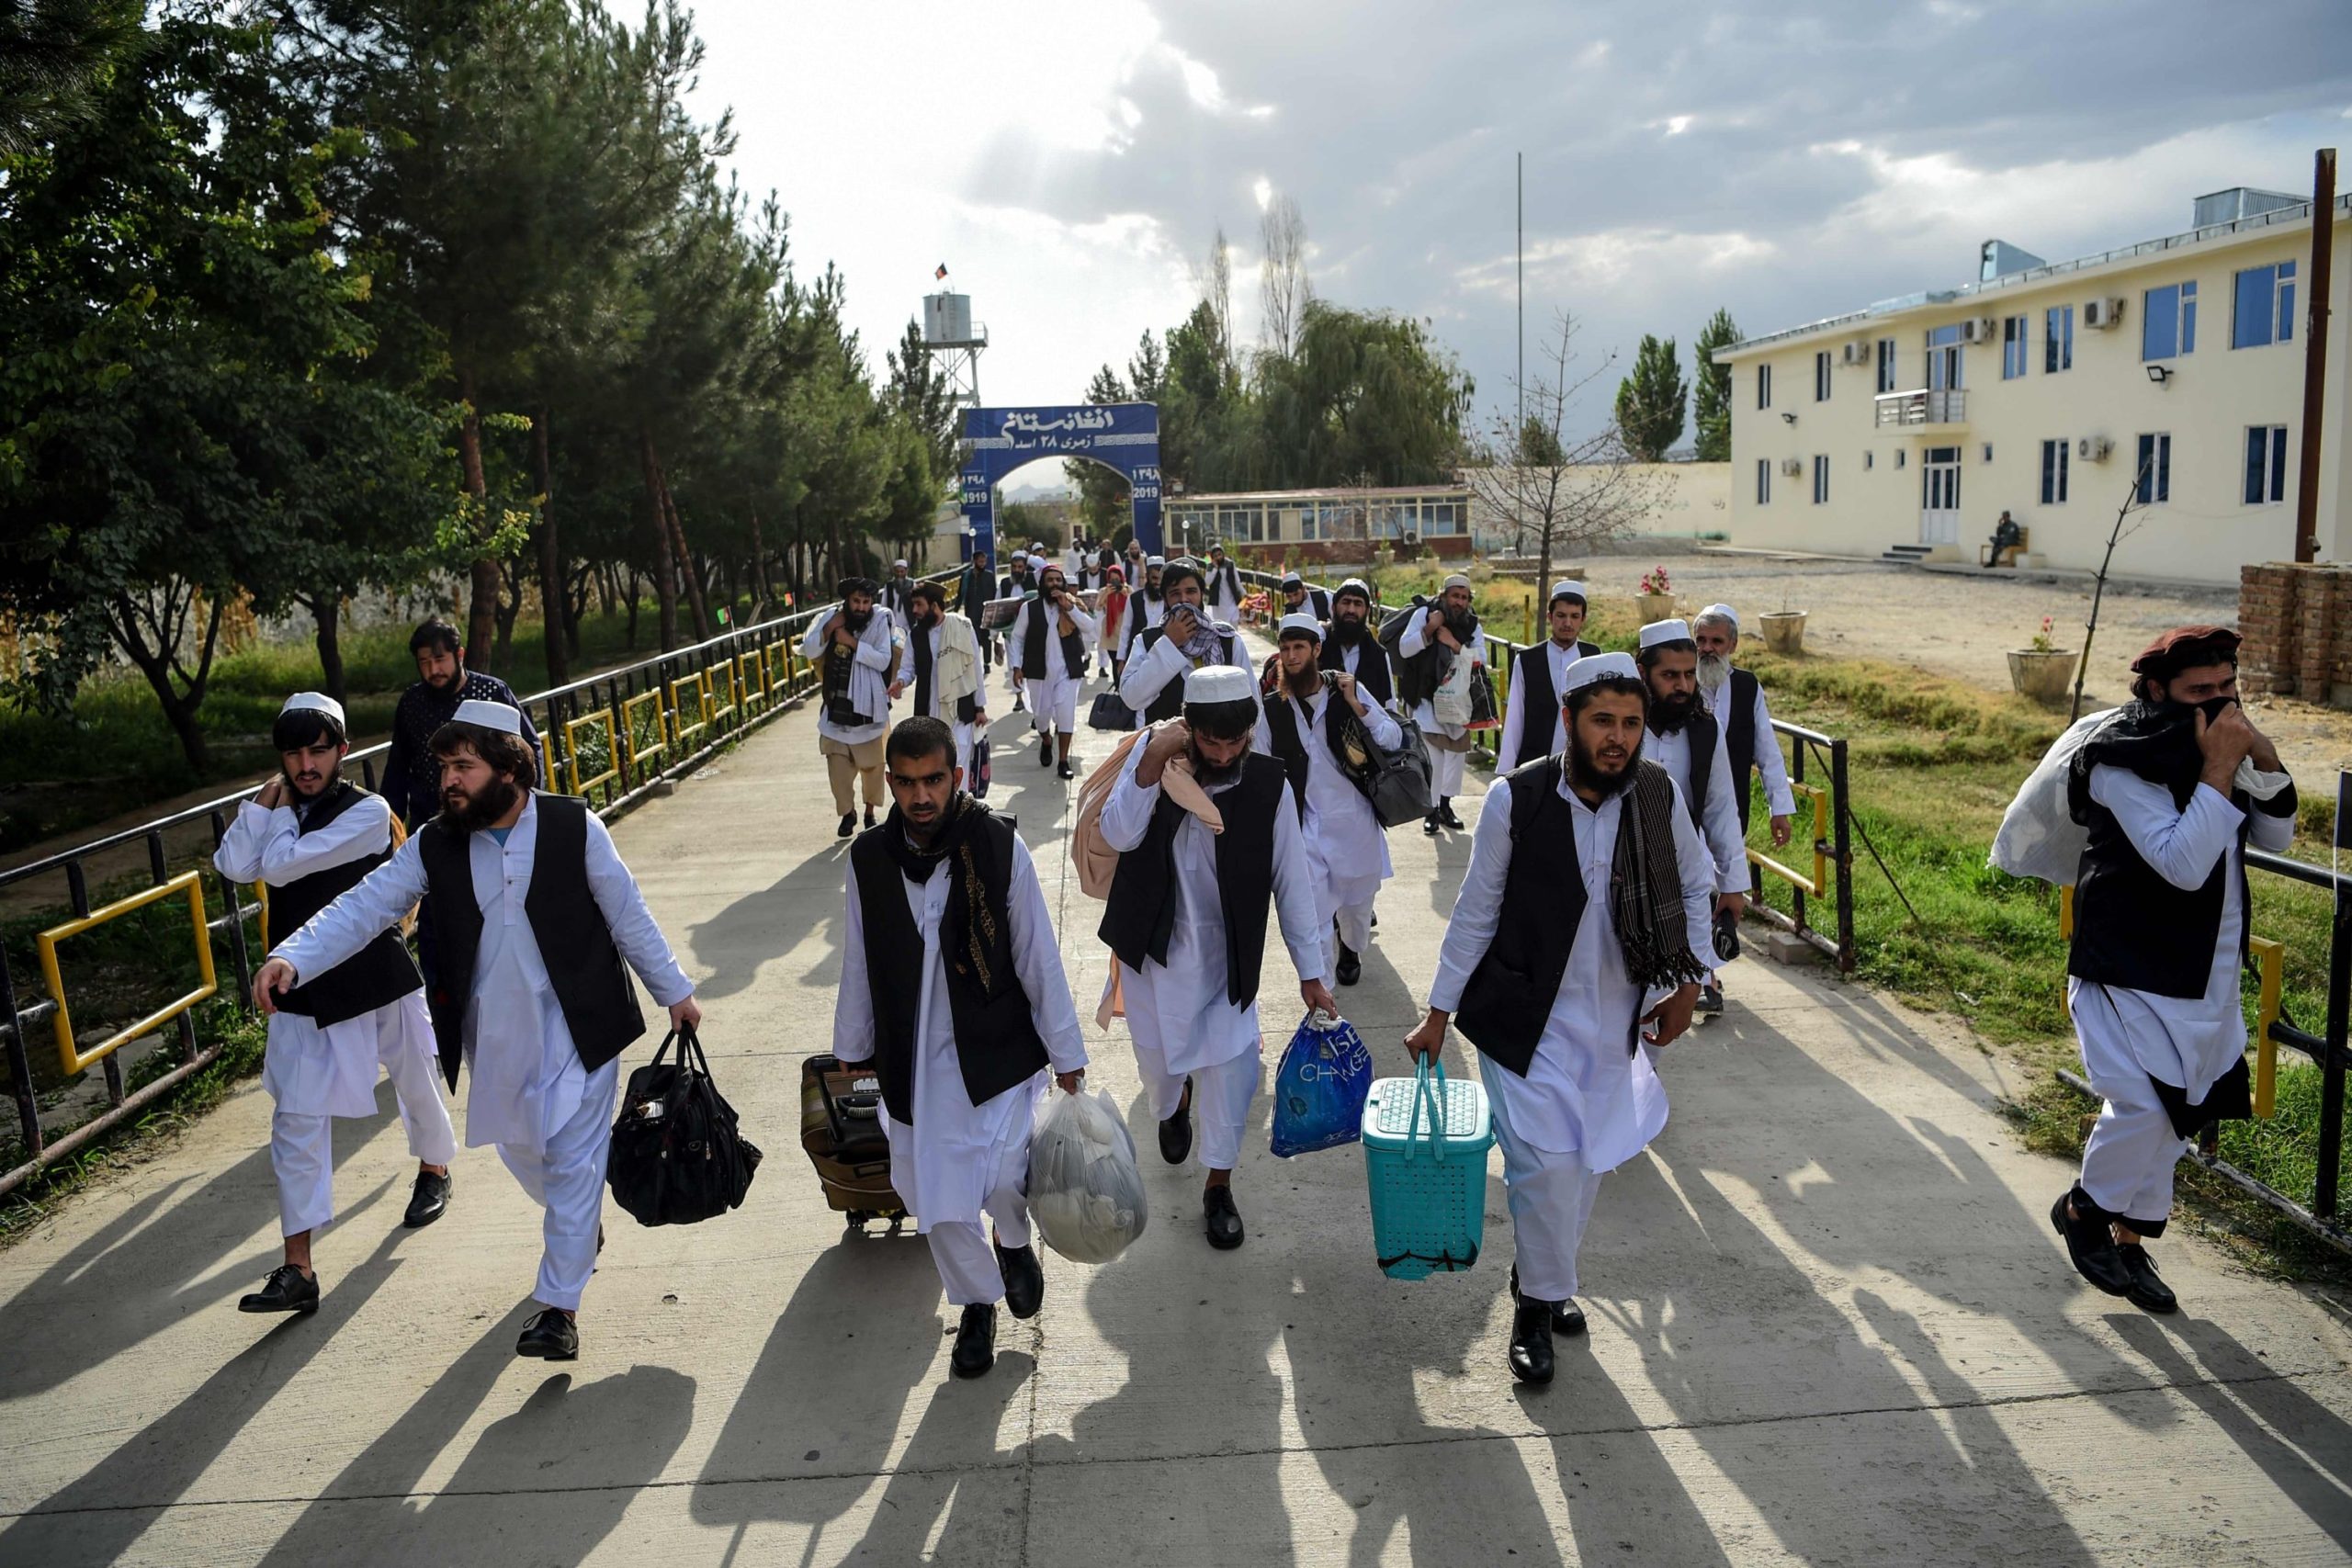 Taliban prisoners walk as they are in the process of being potentially released from Pul-e-Charkhi prison, on the outskirts of Kabul on July 31, 2020.